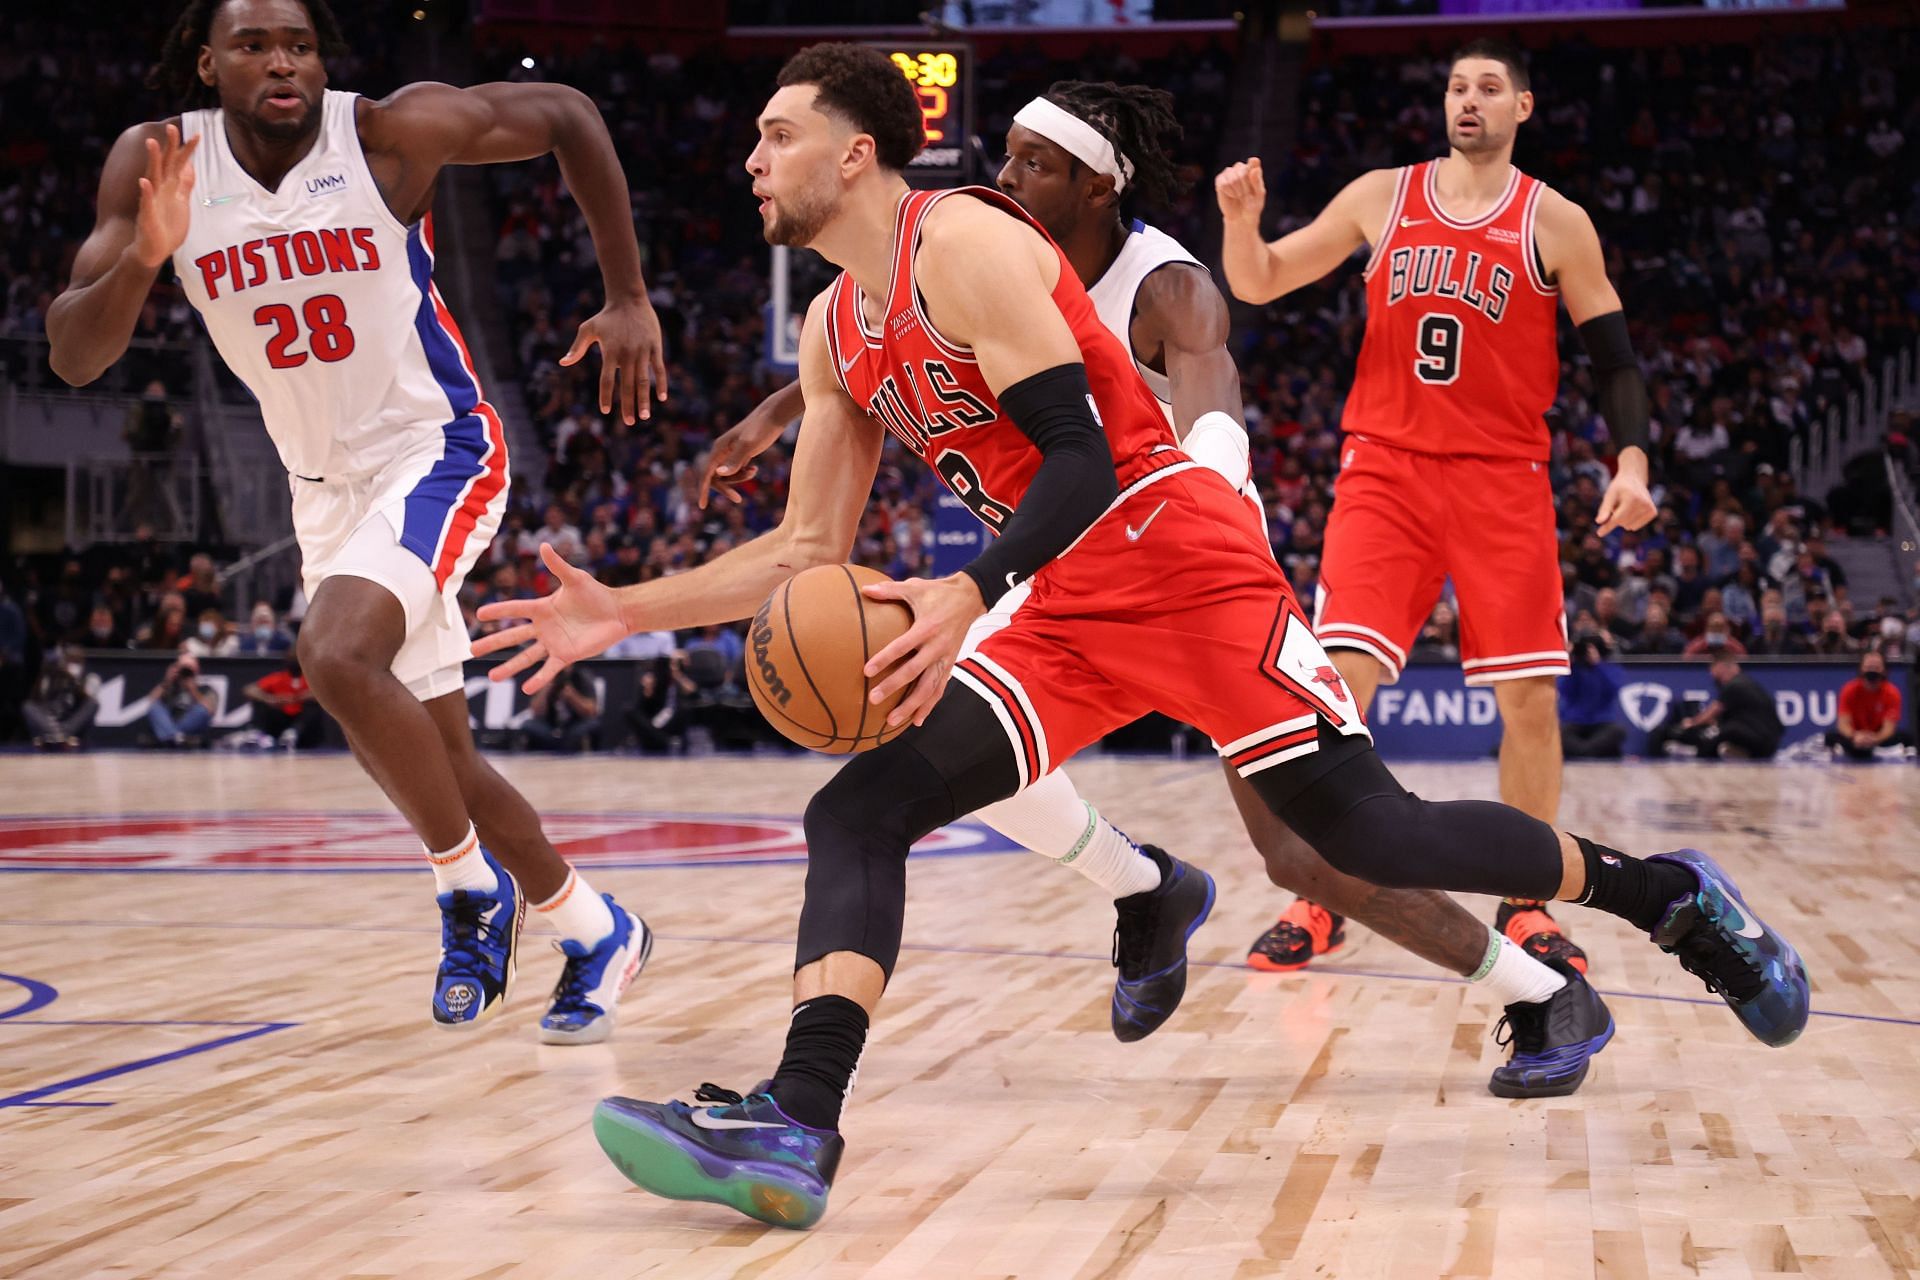 Zach LaVine will lead the Chicago Bulls again against a rematch with the Detroit Pistons